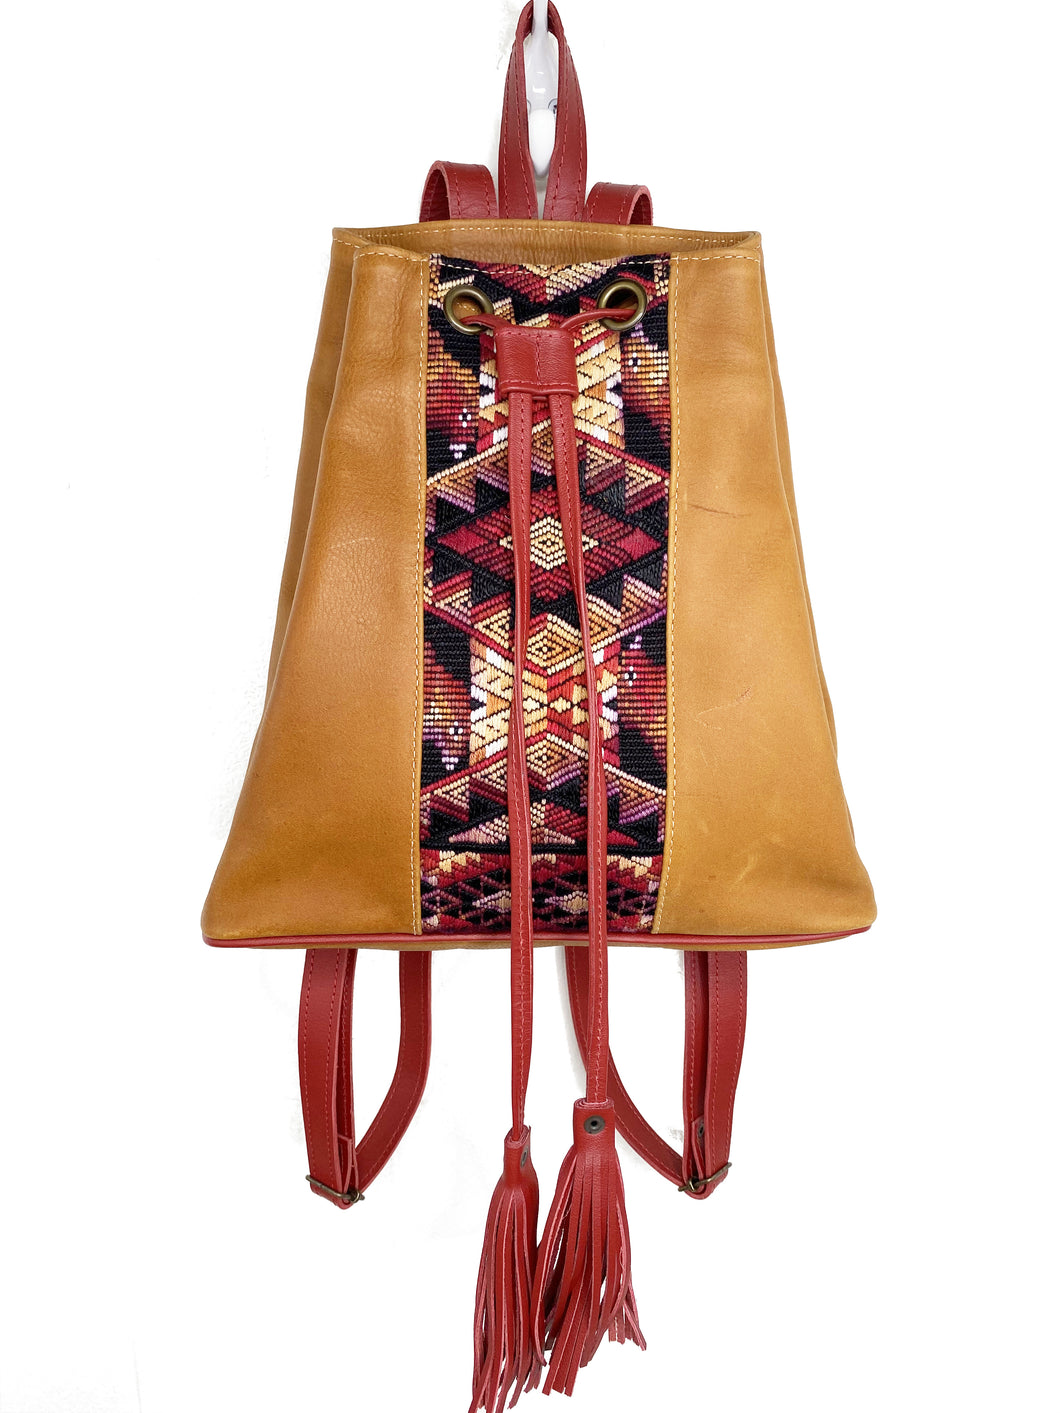 MoonLake Designs Maya bucket backpack in handcrafted pear tan leather with Mayan geometric huipil design and rusty red leather draw straps, backpack straps, and fringe ties